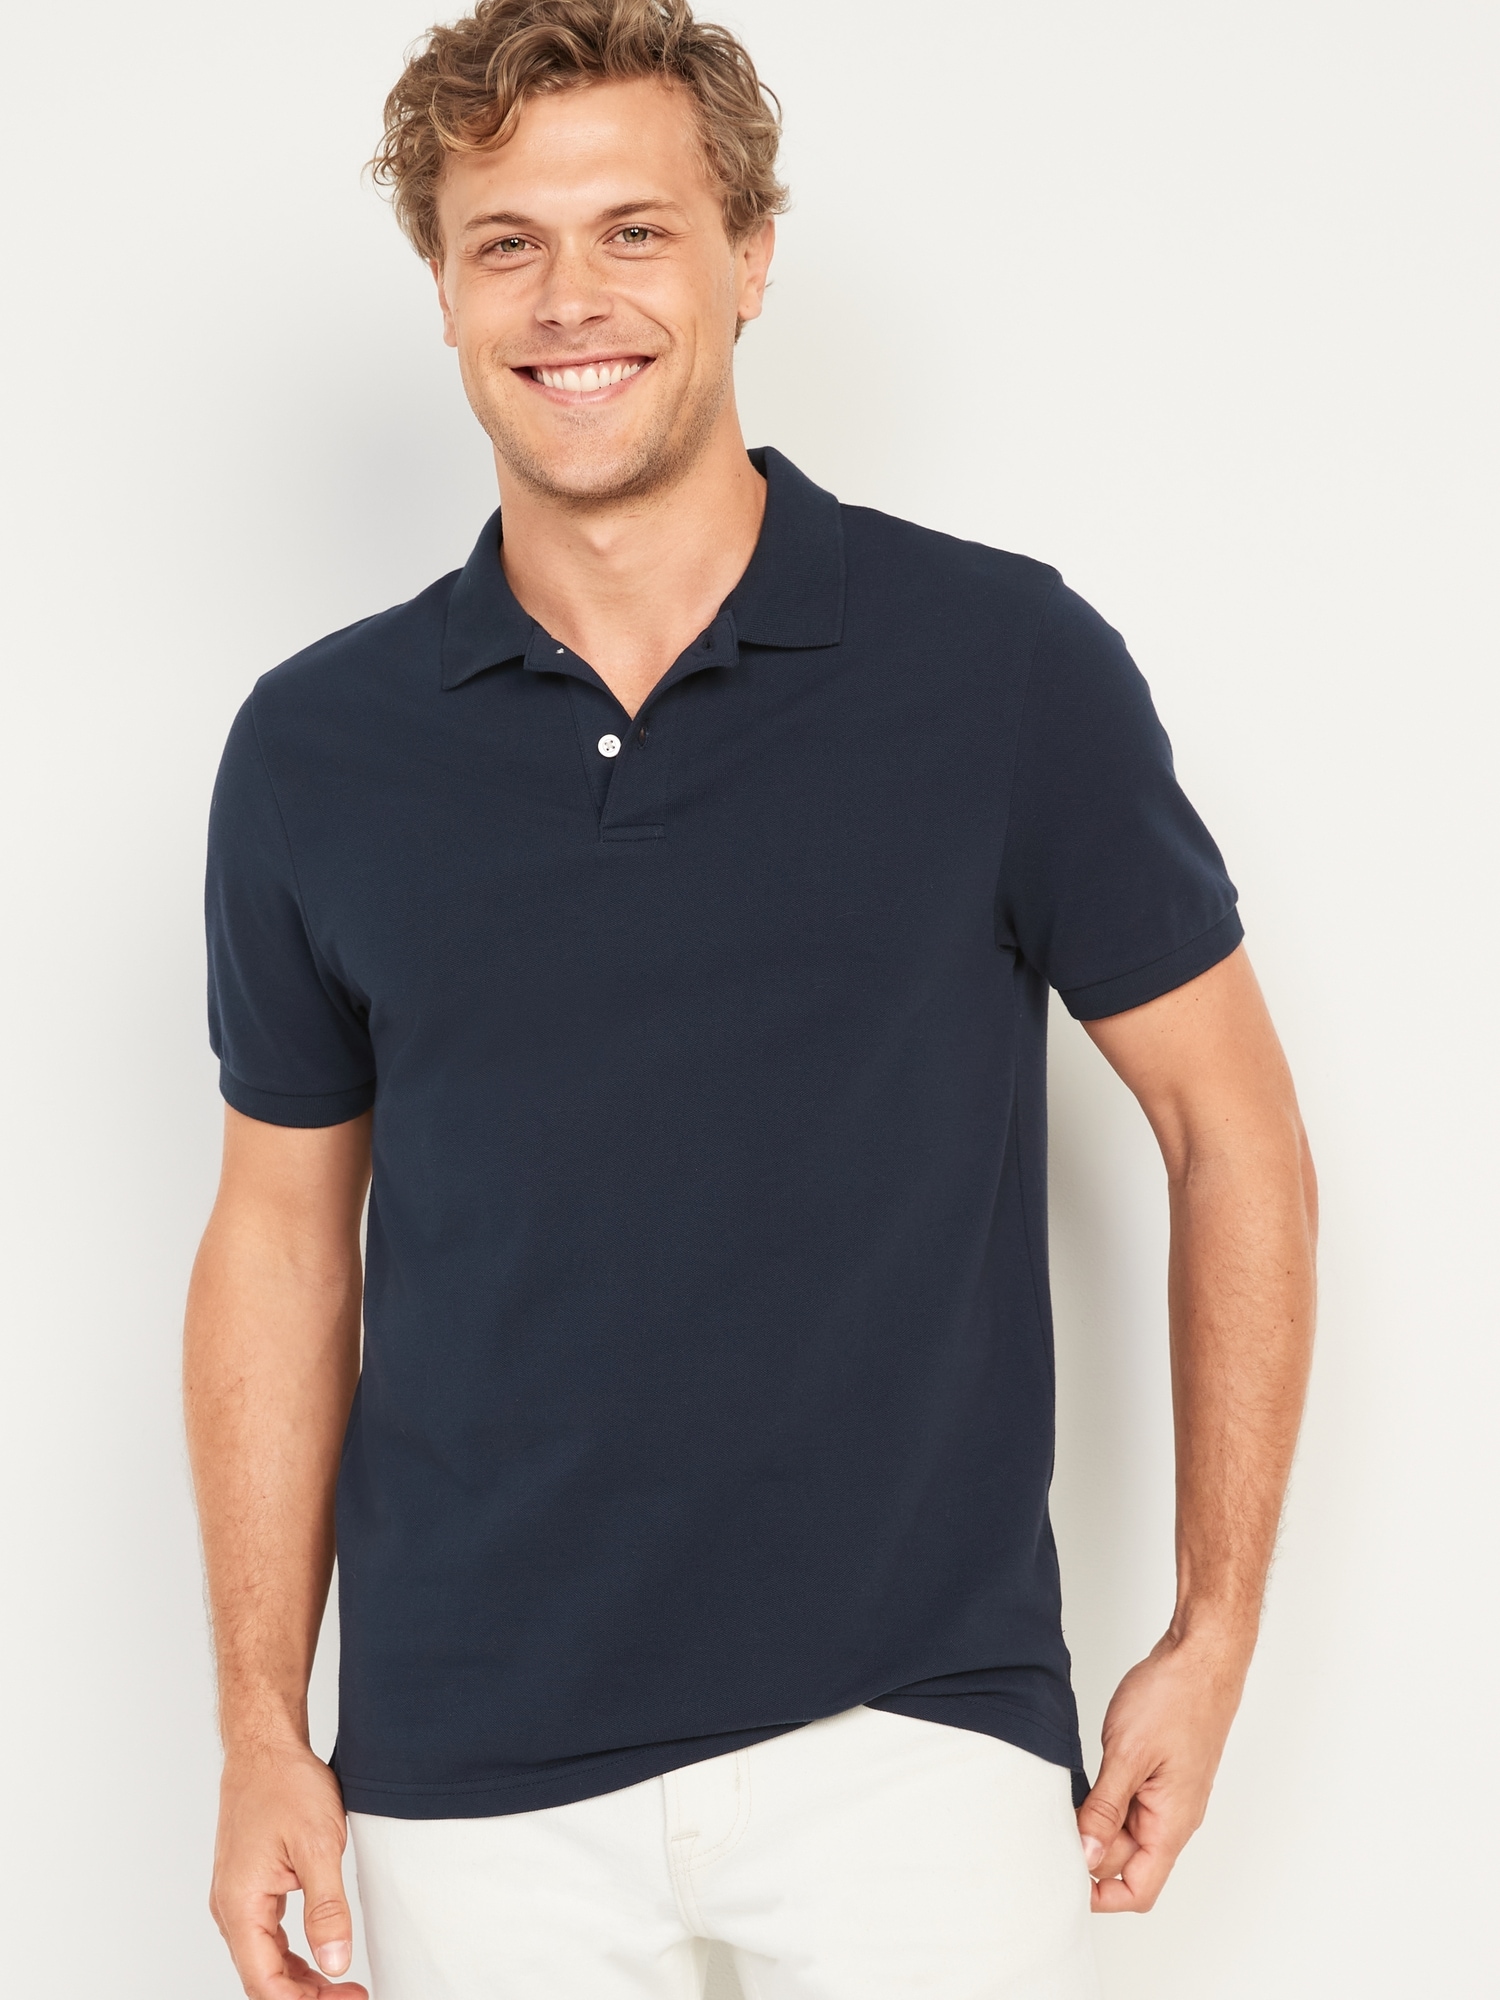 Slim Fit Pique Polo Hot Deal